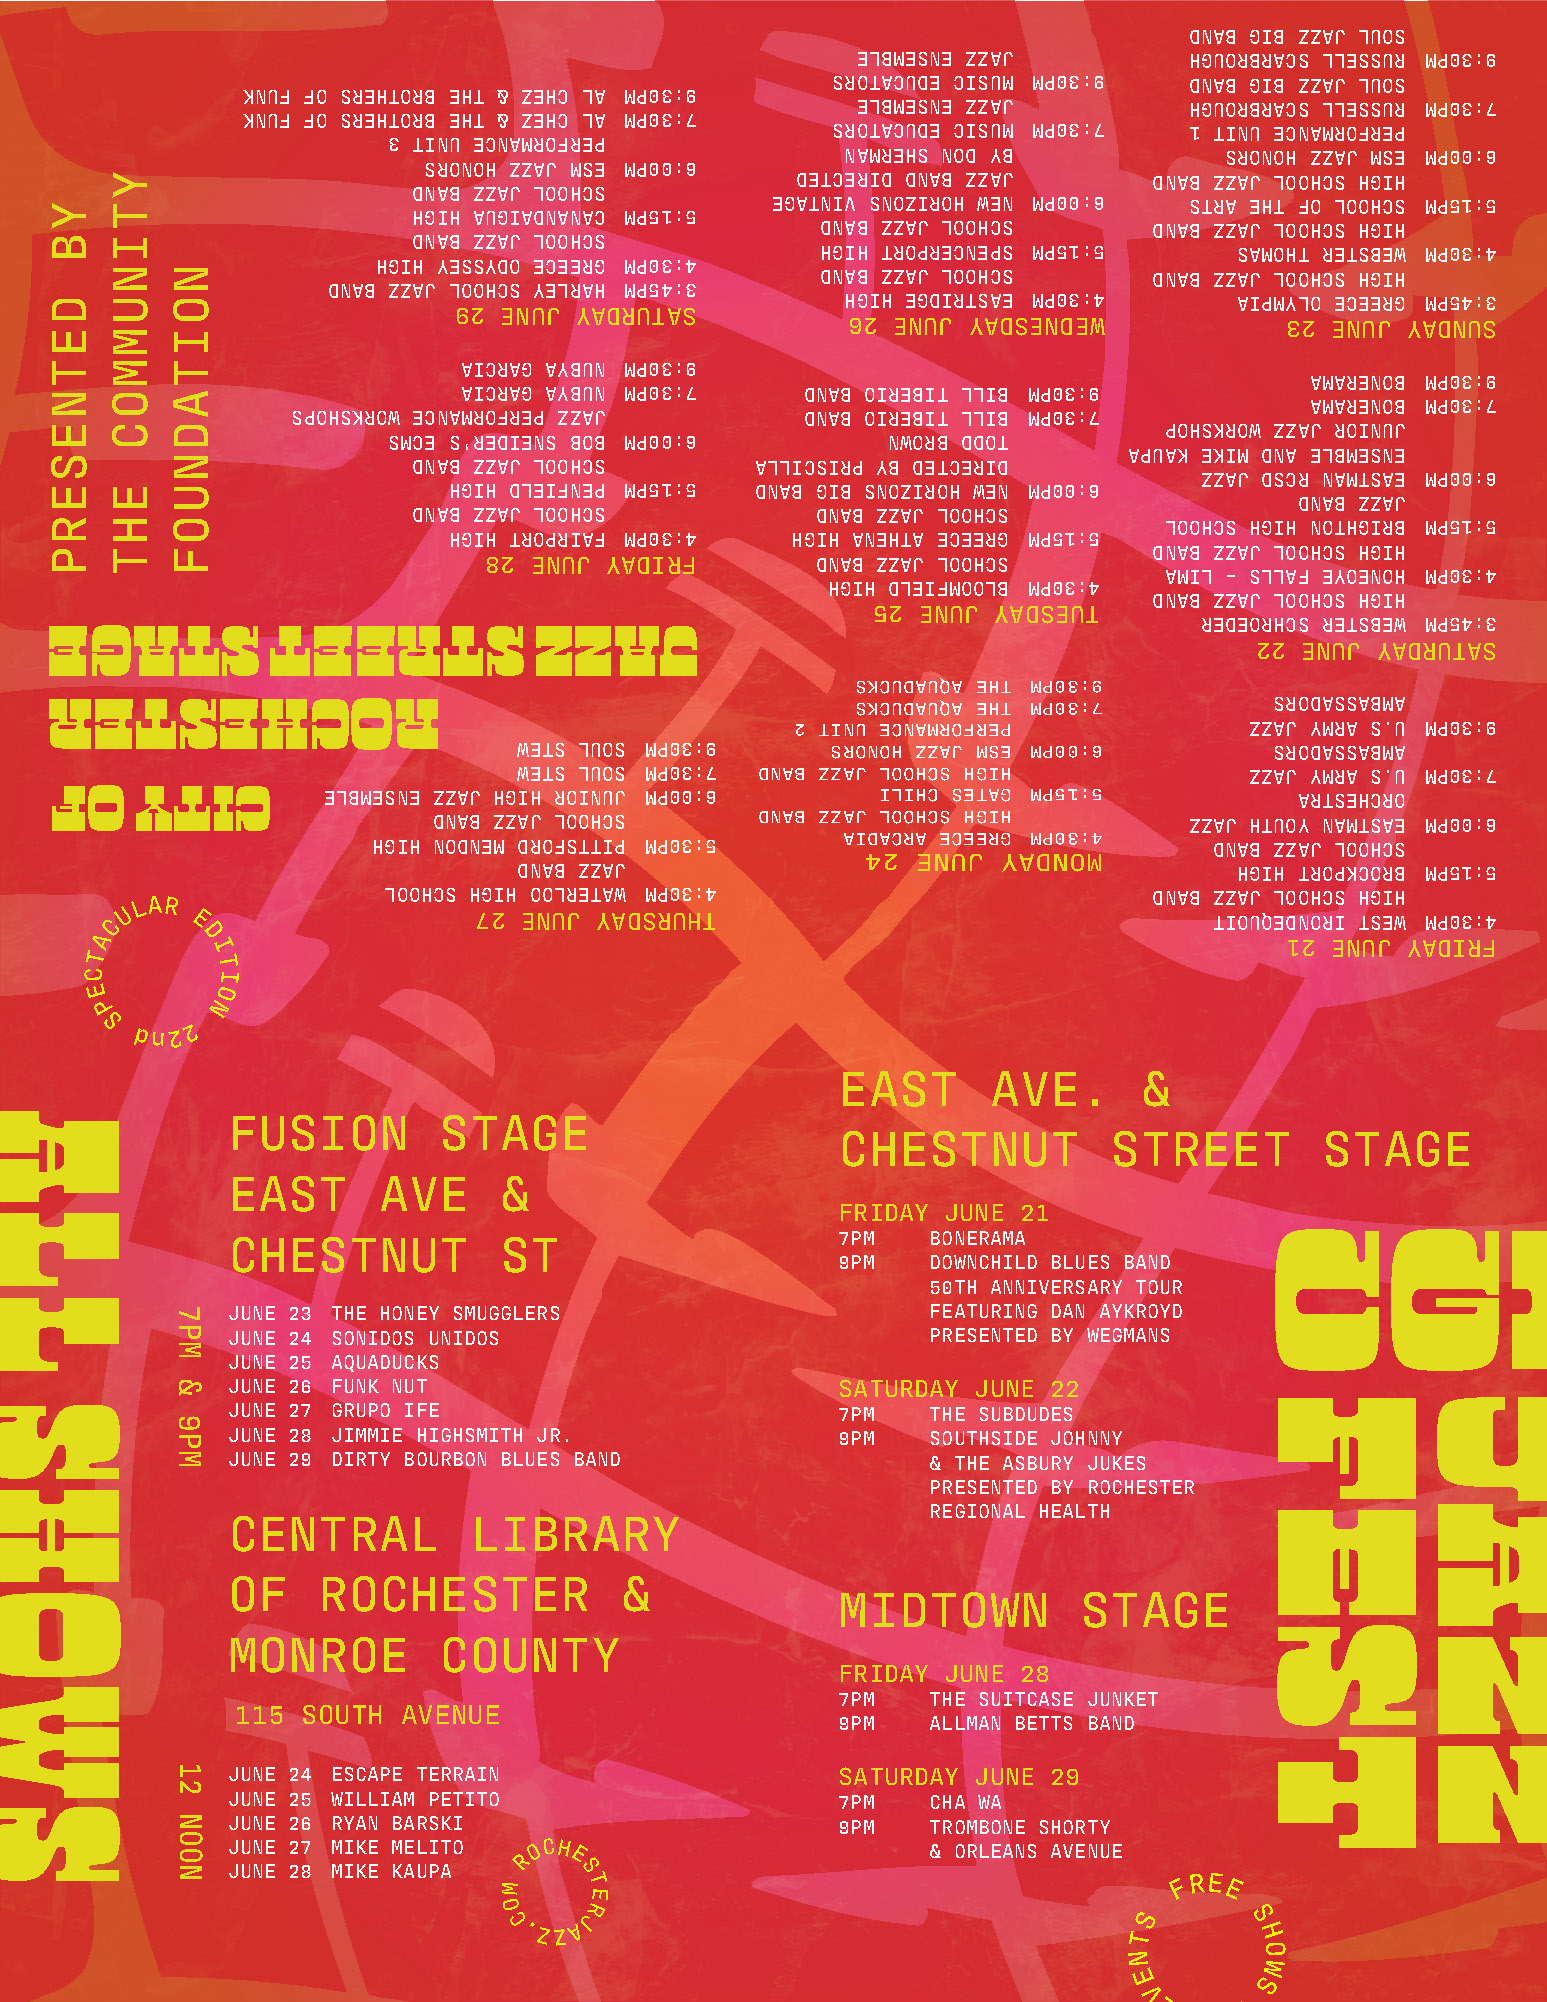 A promotional poster for the Rochester Jazz Fest.